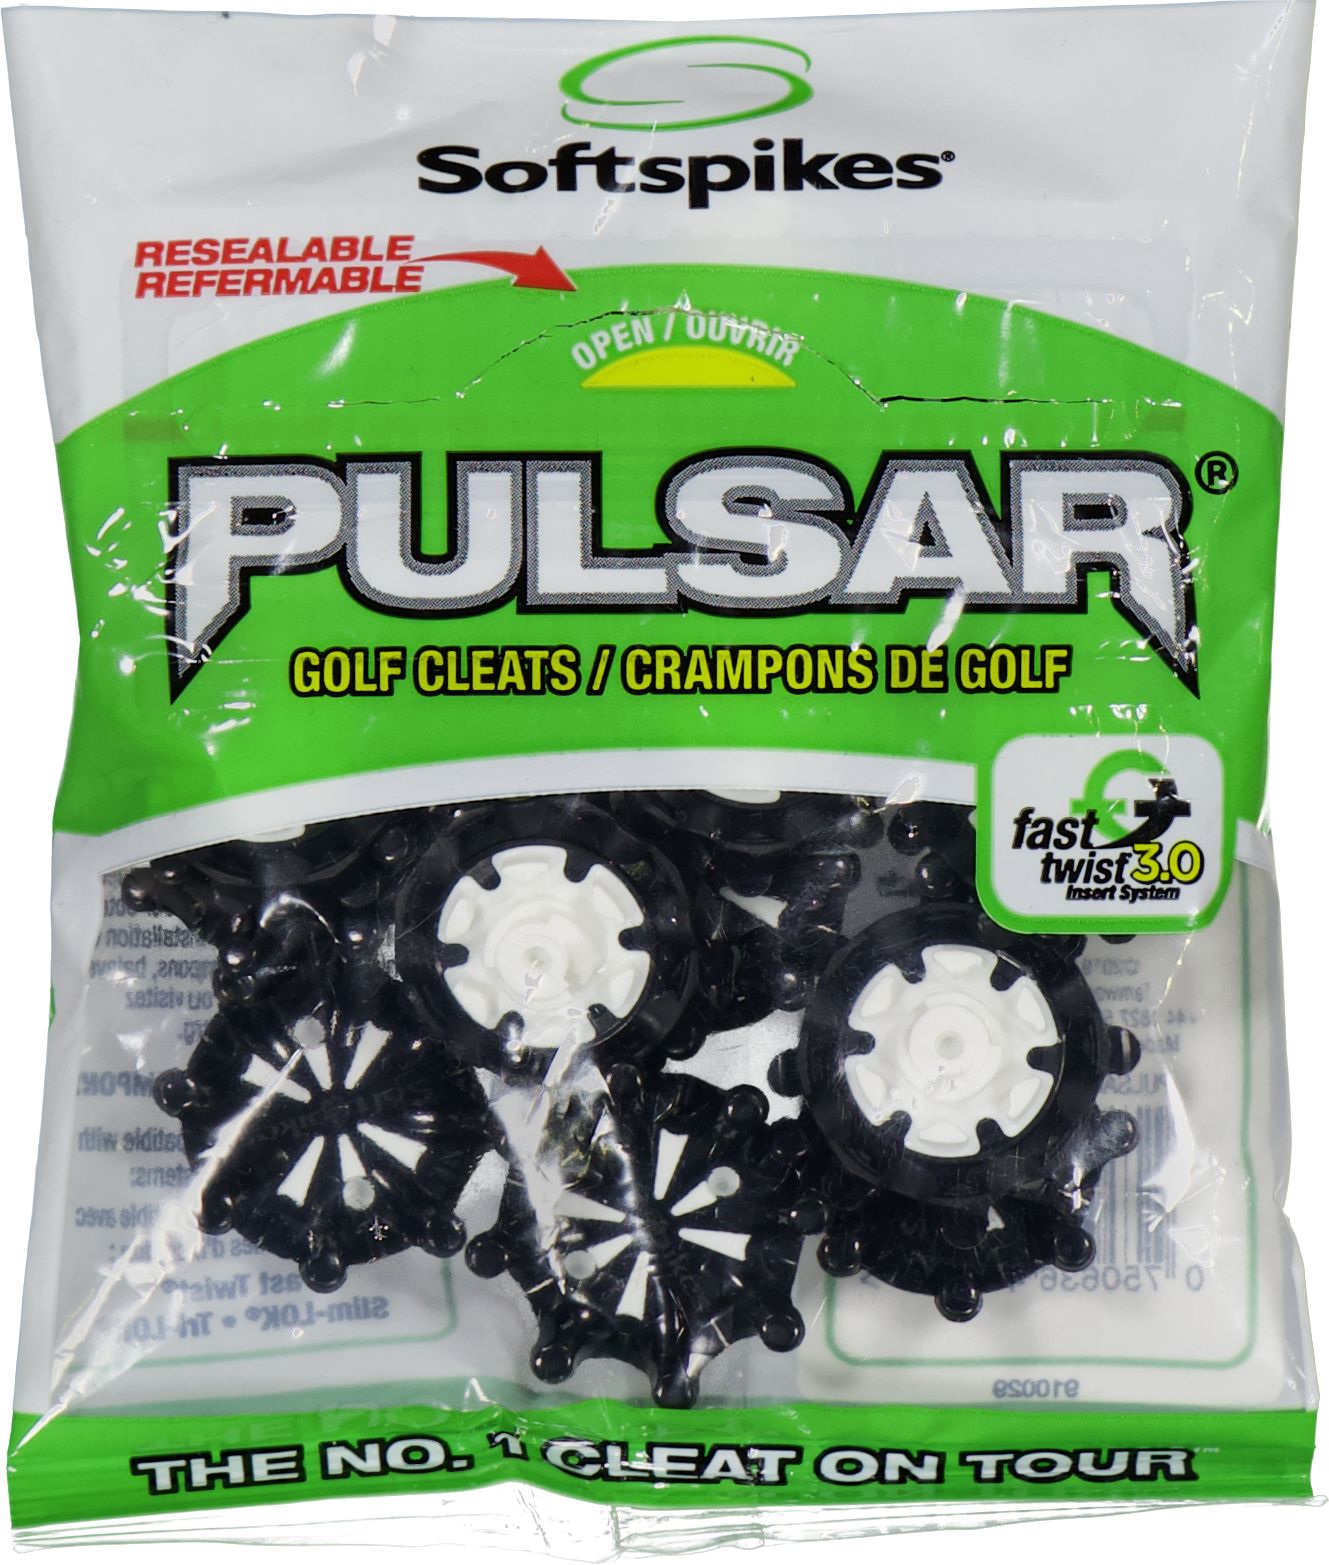 SOFTSPIKES, PULSAR FT 3.0